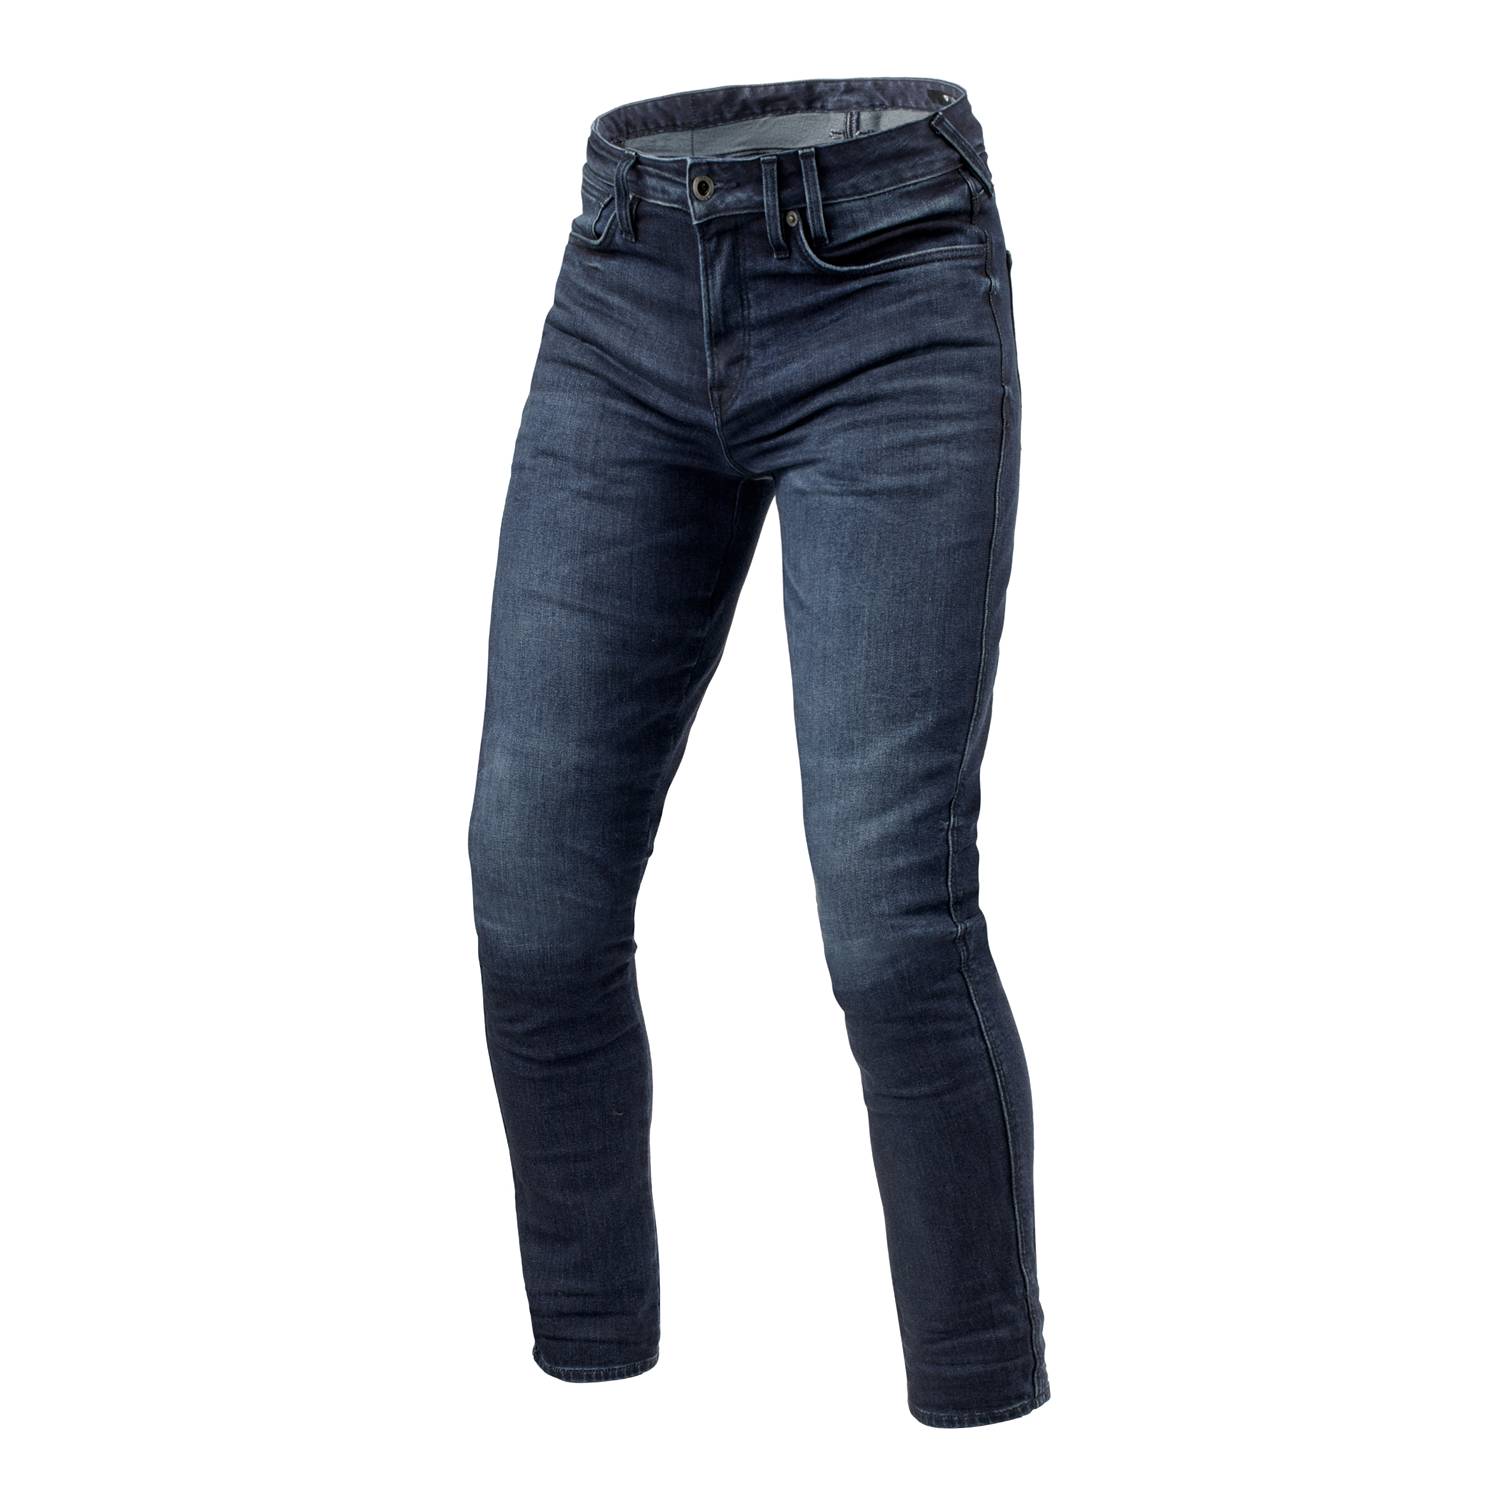 Image of REV'IT! Jeans Carlin SK Dark Blue Used L32 Motorcycle Jeans Size L32/W32 ID 8700001376488